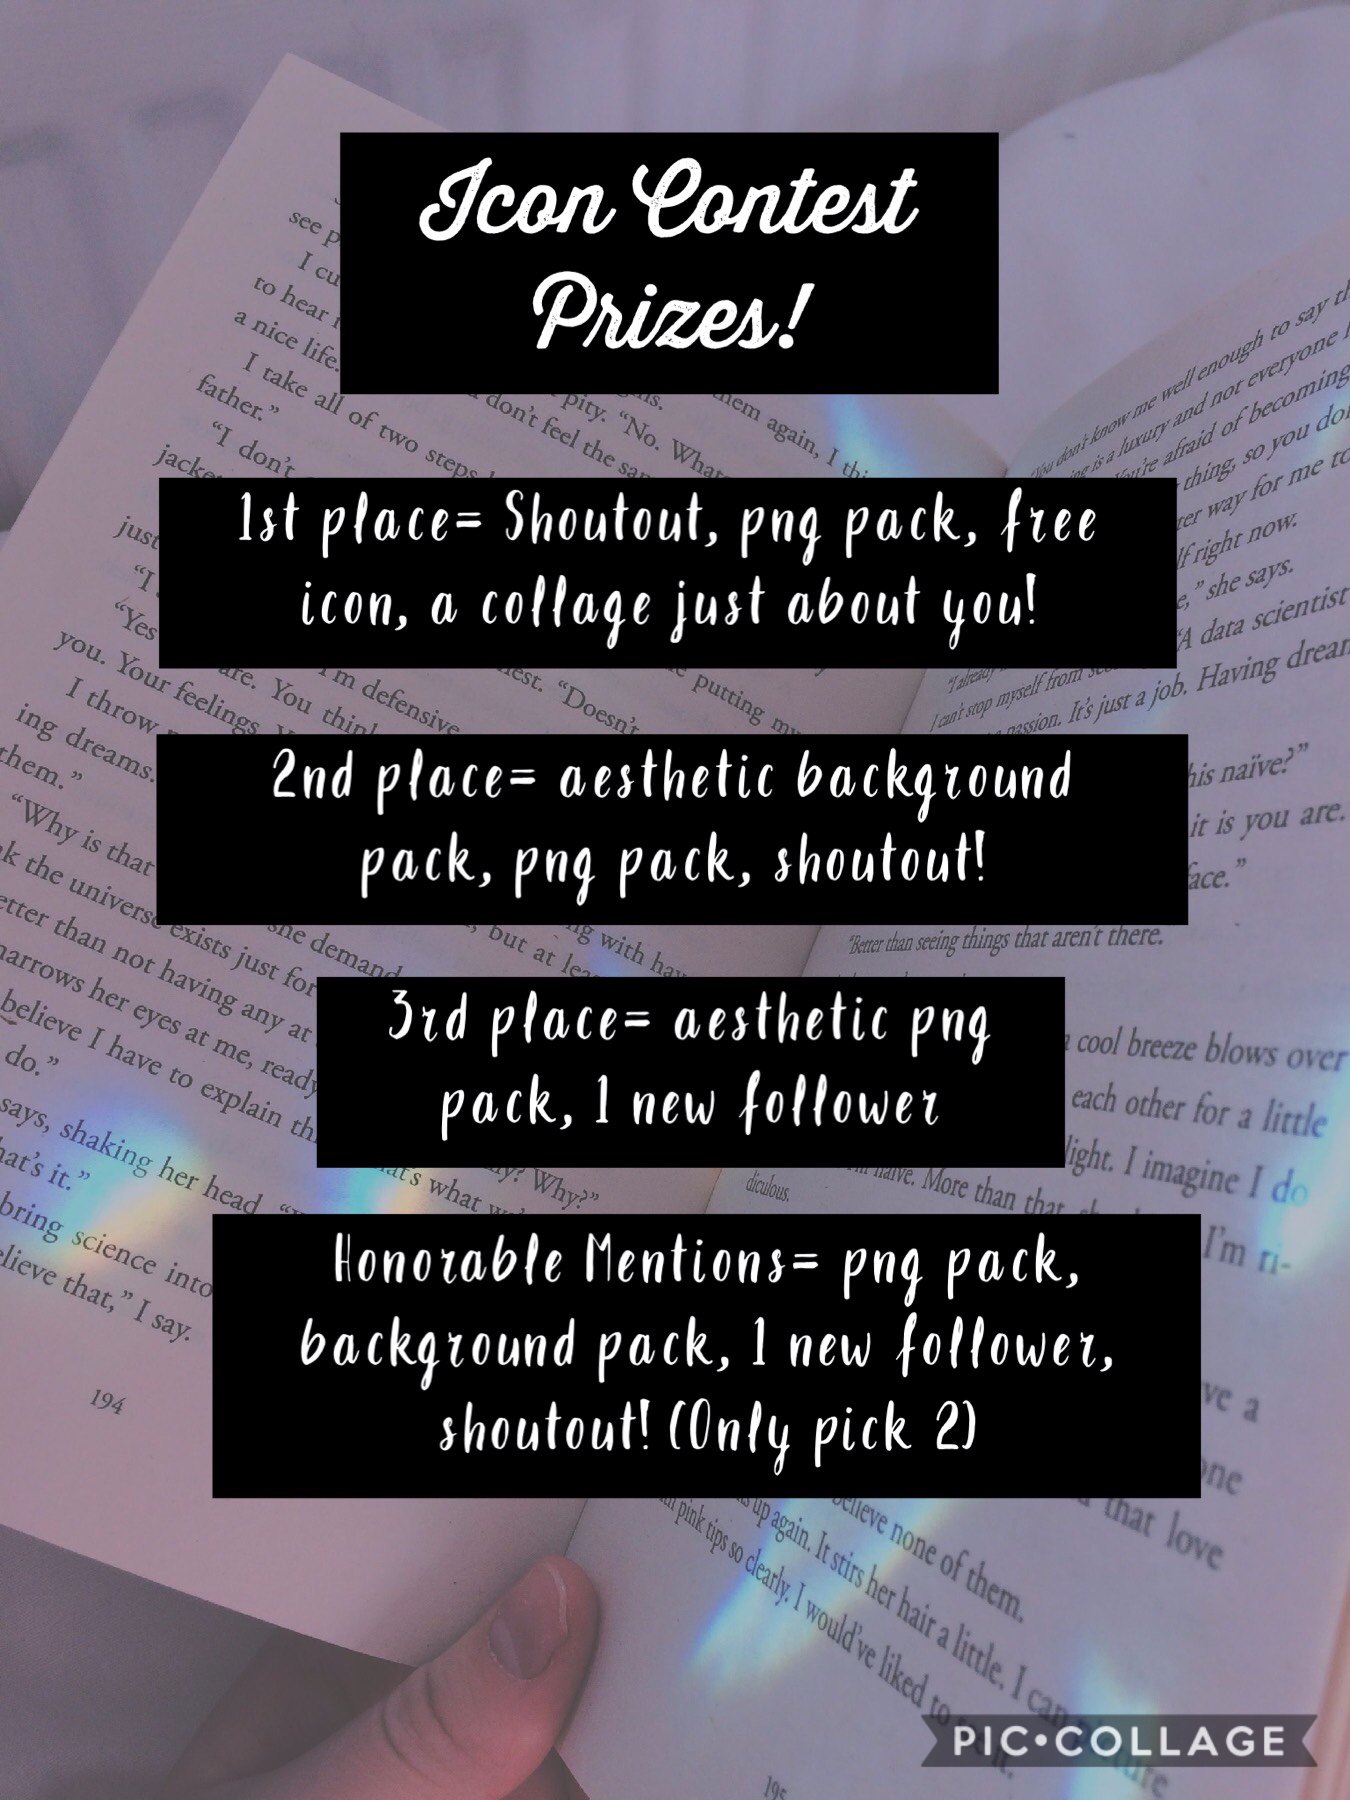 !Tap!
Thank you for everyone who were in the contest, I appreciate your hard work. So to pay you back I'm giving you prizes for all of you guys!!! June 15 is the last day to turn it in!!! Good luck